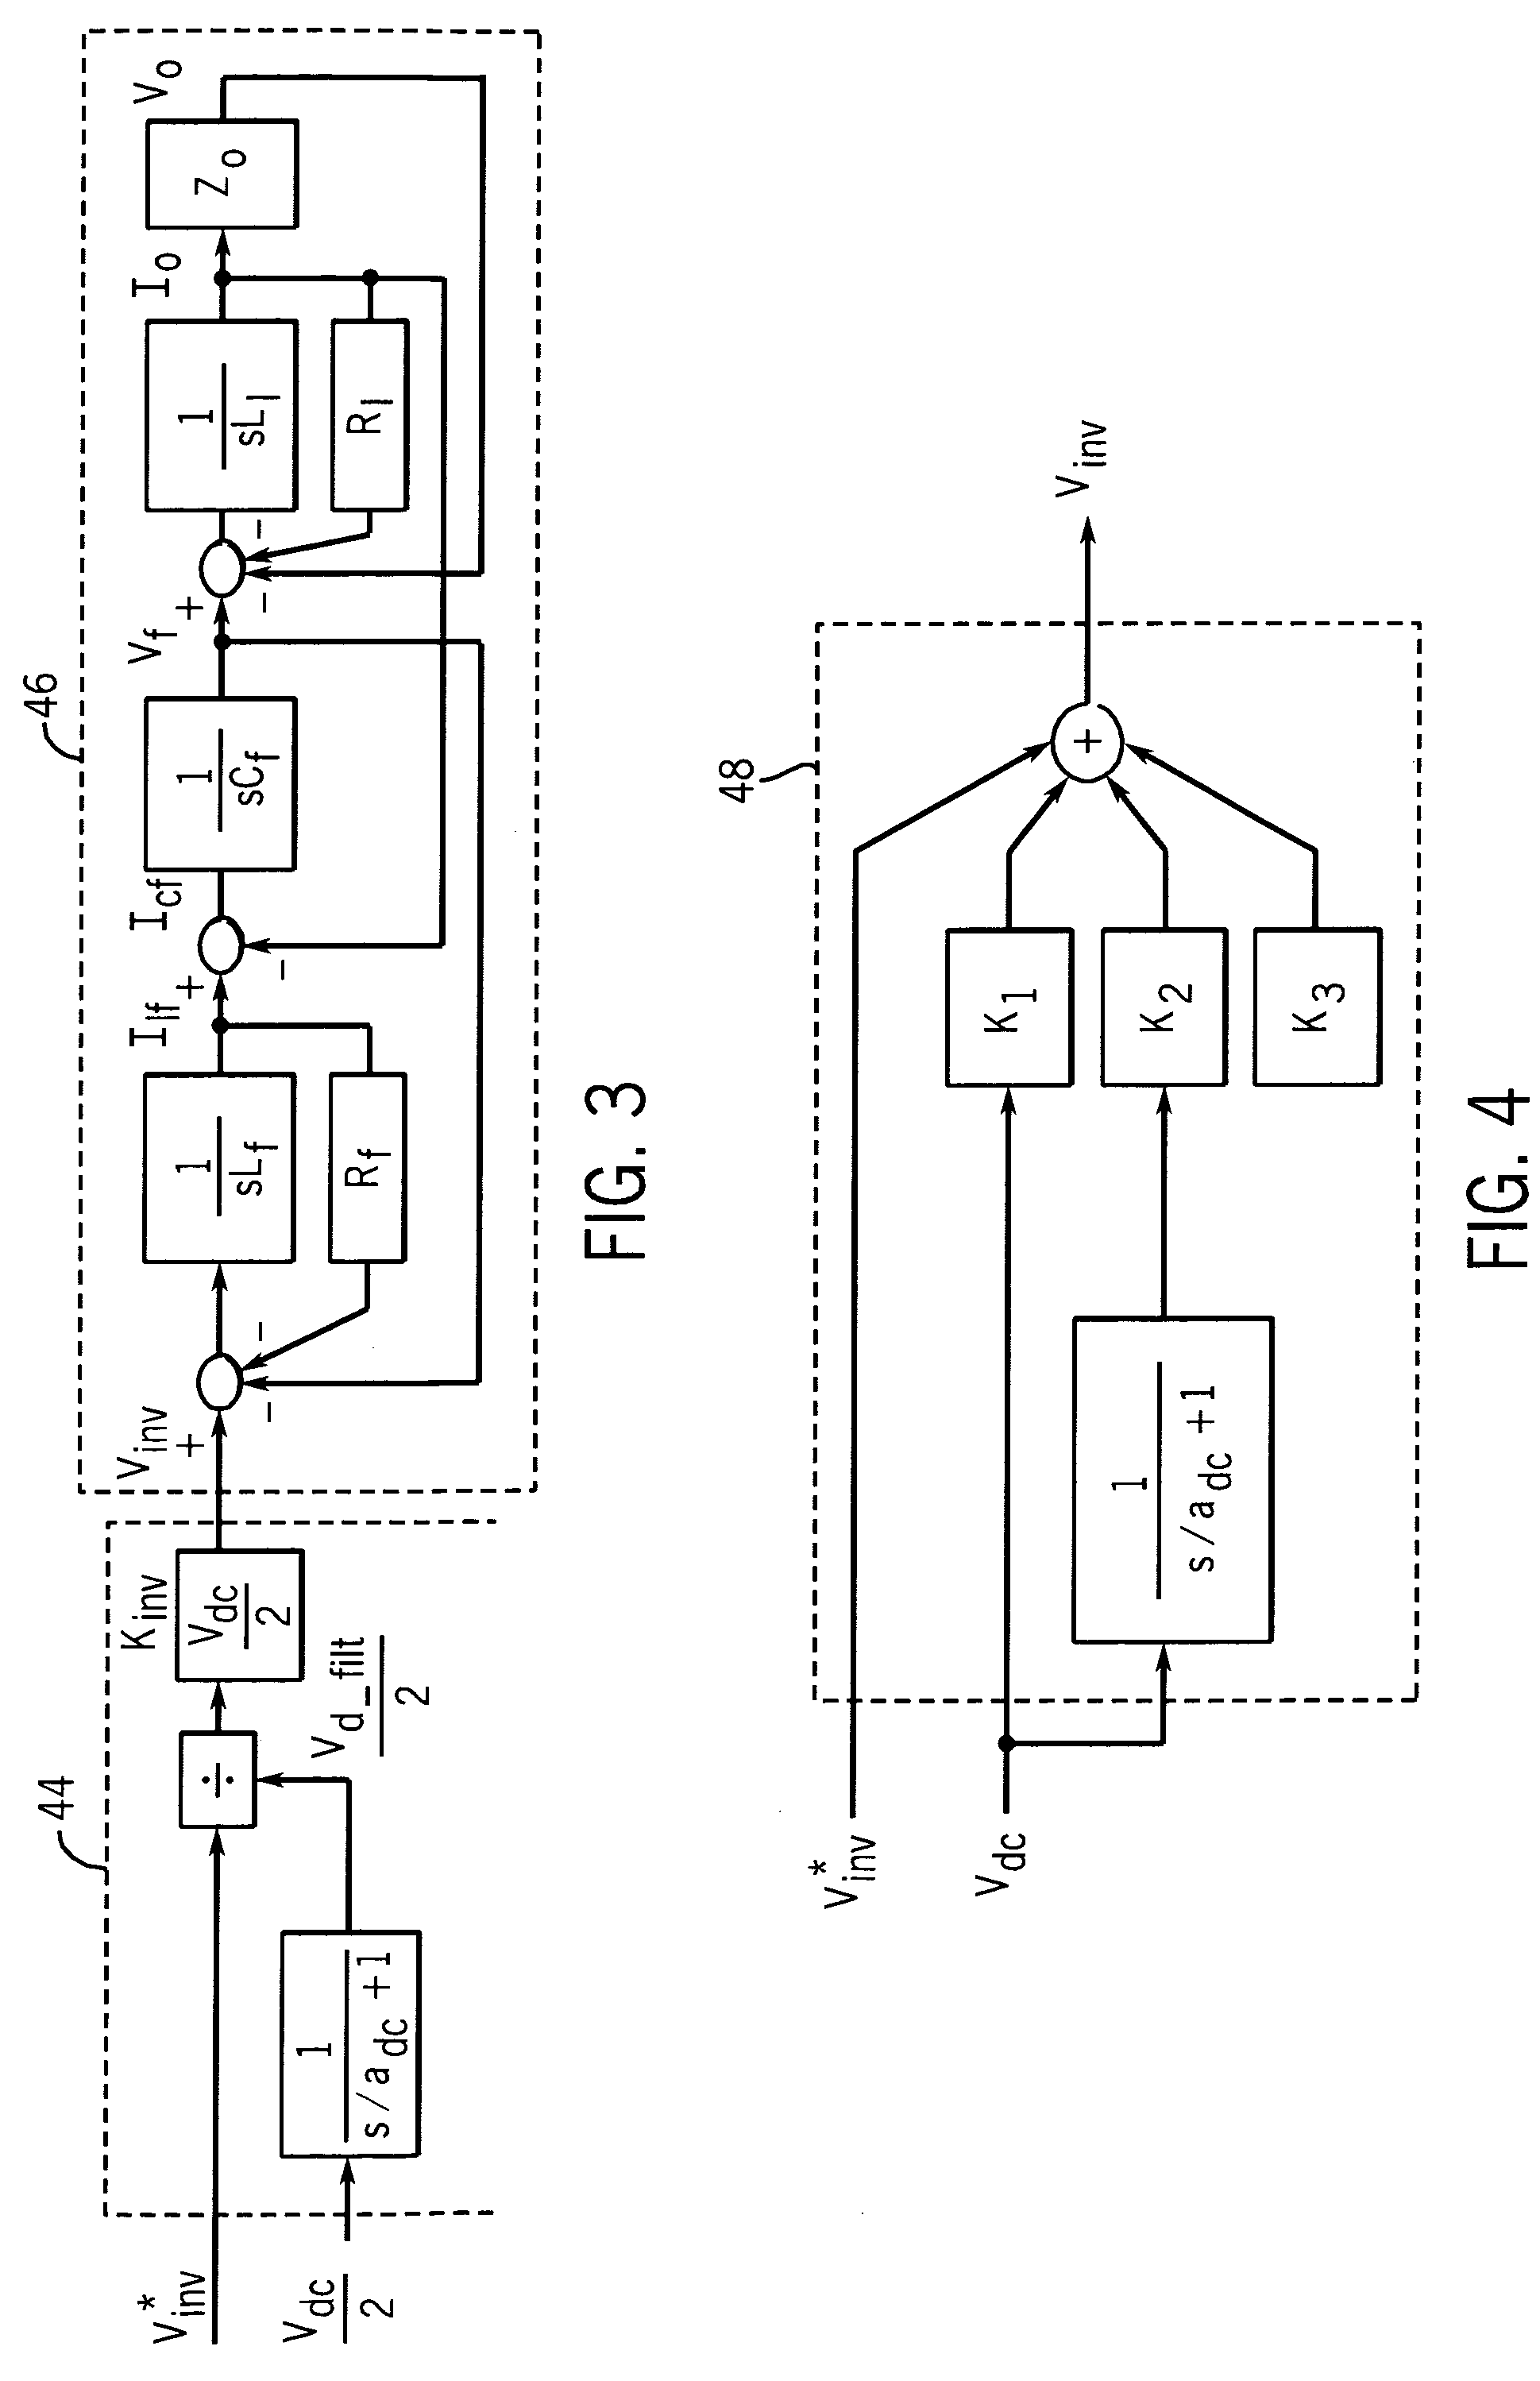 System and method of controlling power to a non-motor load